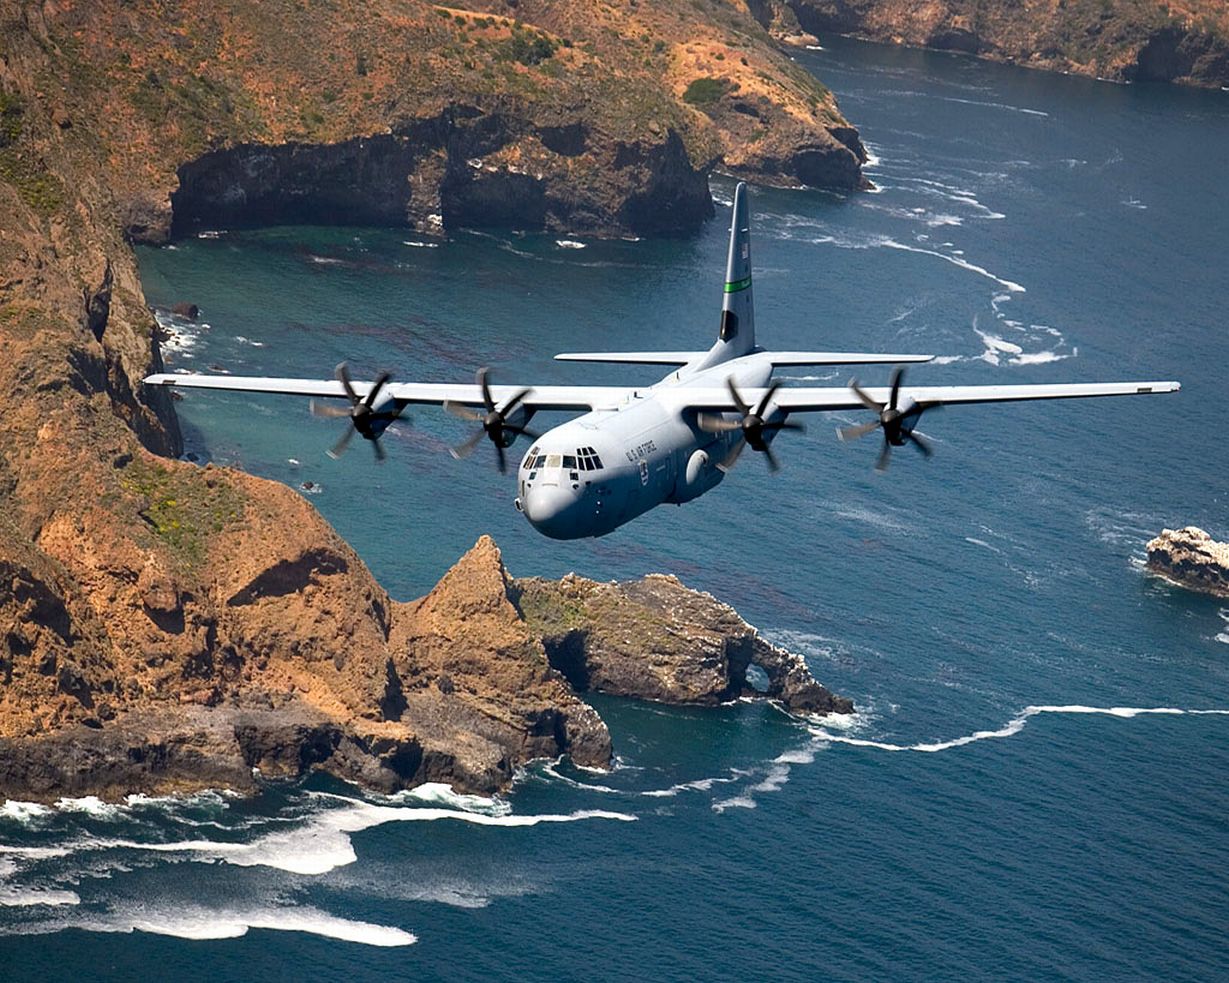 C130 does anyone have 130 high resolution pTi